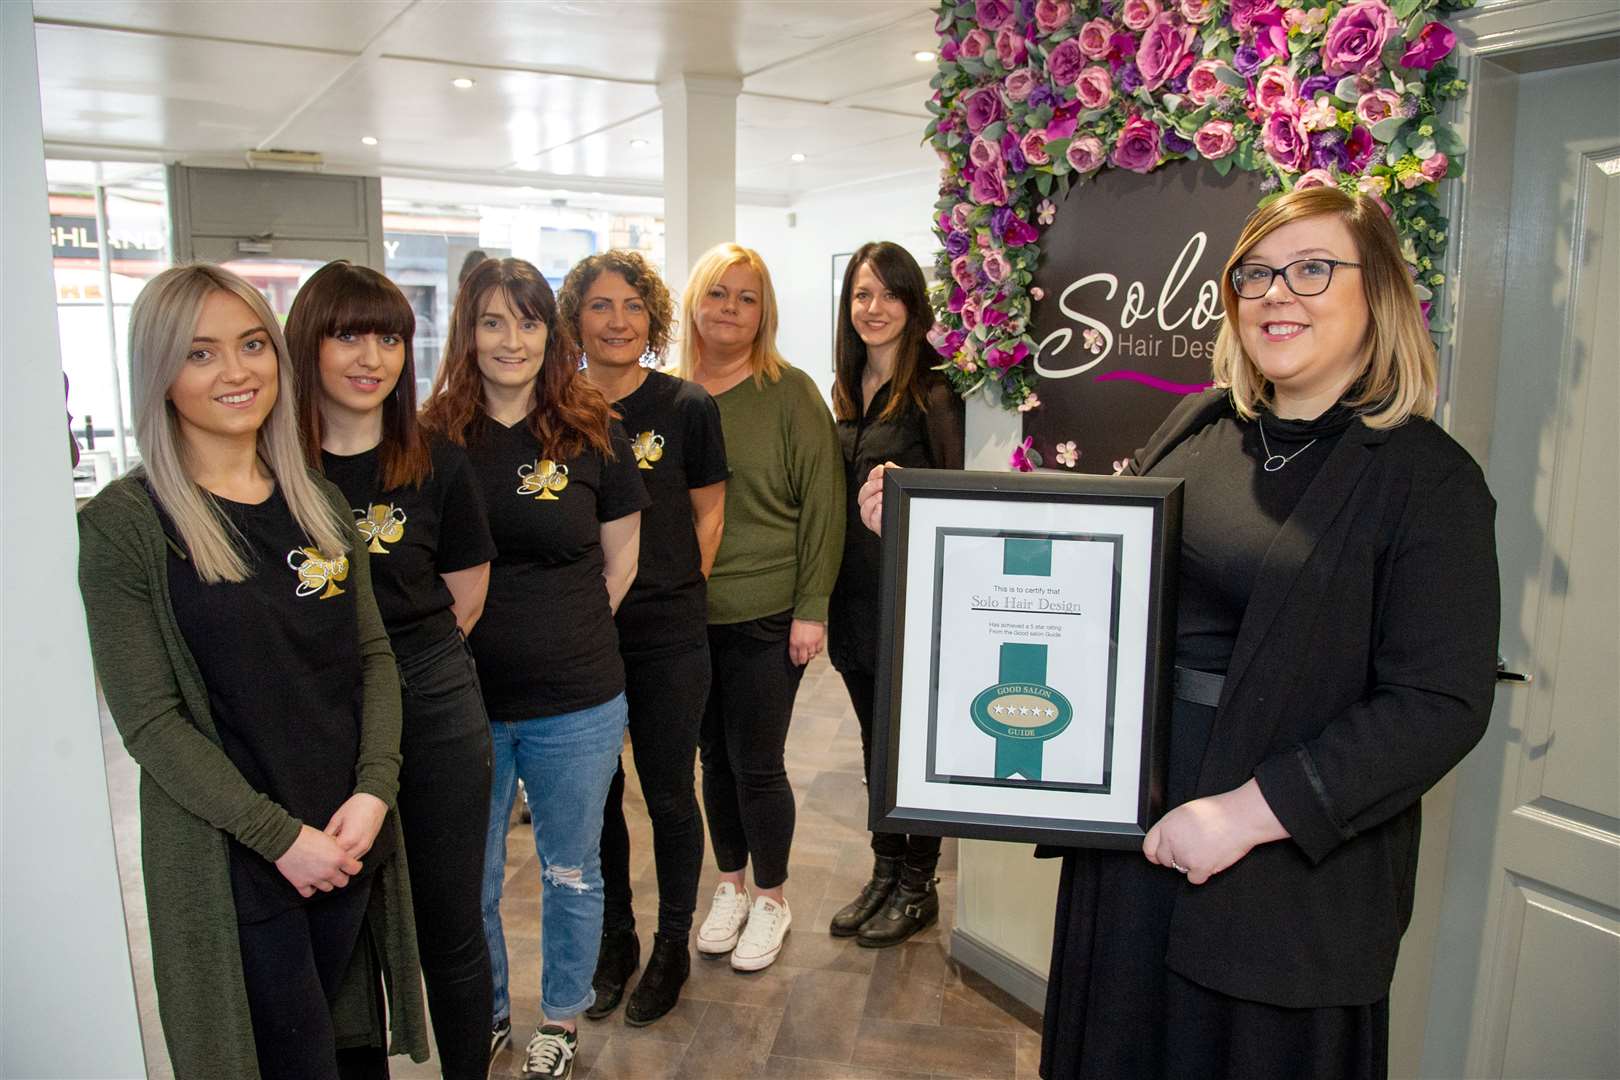 The Solo Hair Design team show off their five star rating from the Good Salon Guide. ..Owner Lisa Lawrence with staff - left to right - Lisa Piper, Lauren MacDonald, Natalie Gilchrist, Wendy Davidson, Joanne Hair and Dannielle Davies. ..Picture: Daniel Forsyth..